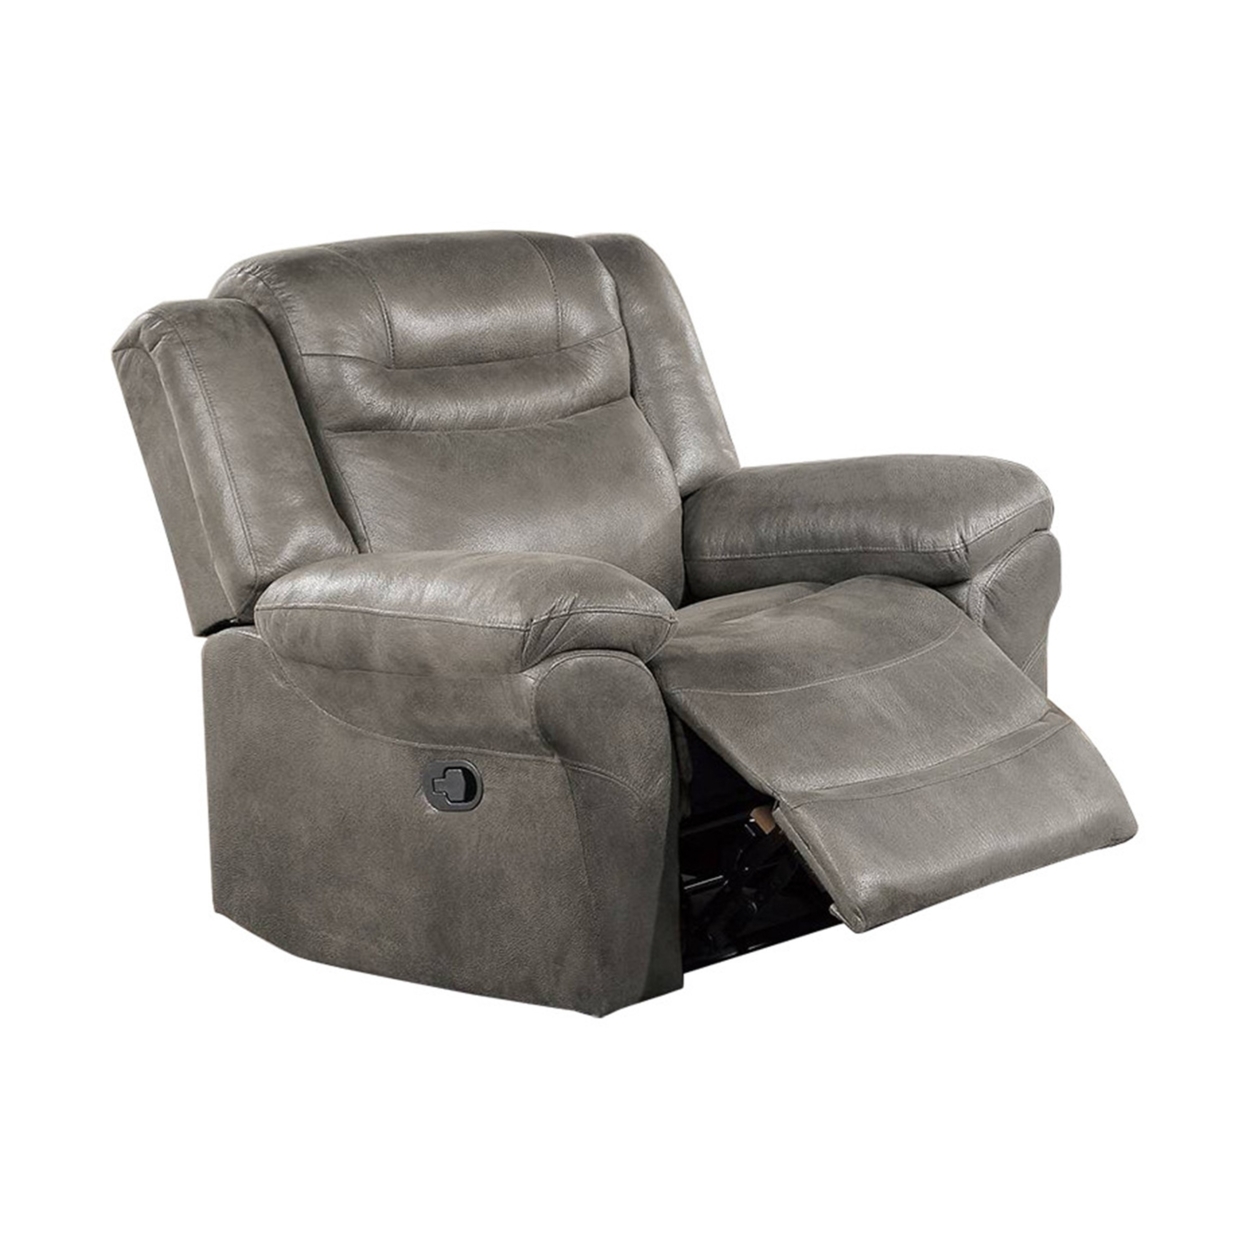 Betty 41 Inch Manual Recliner Armchair, Pull Tab Mechanism, Smooth Gray